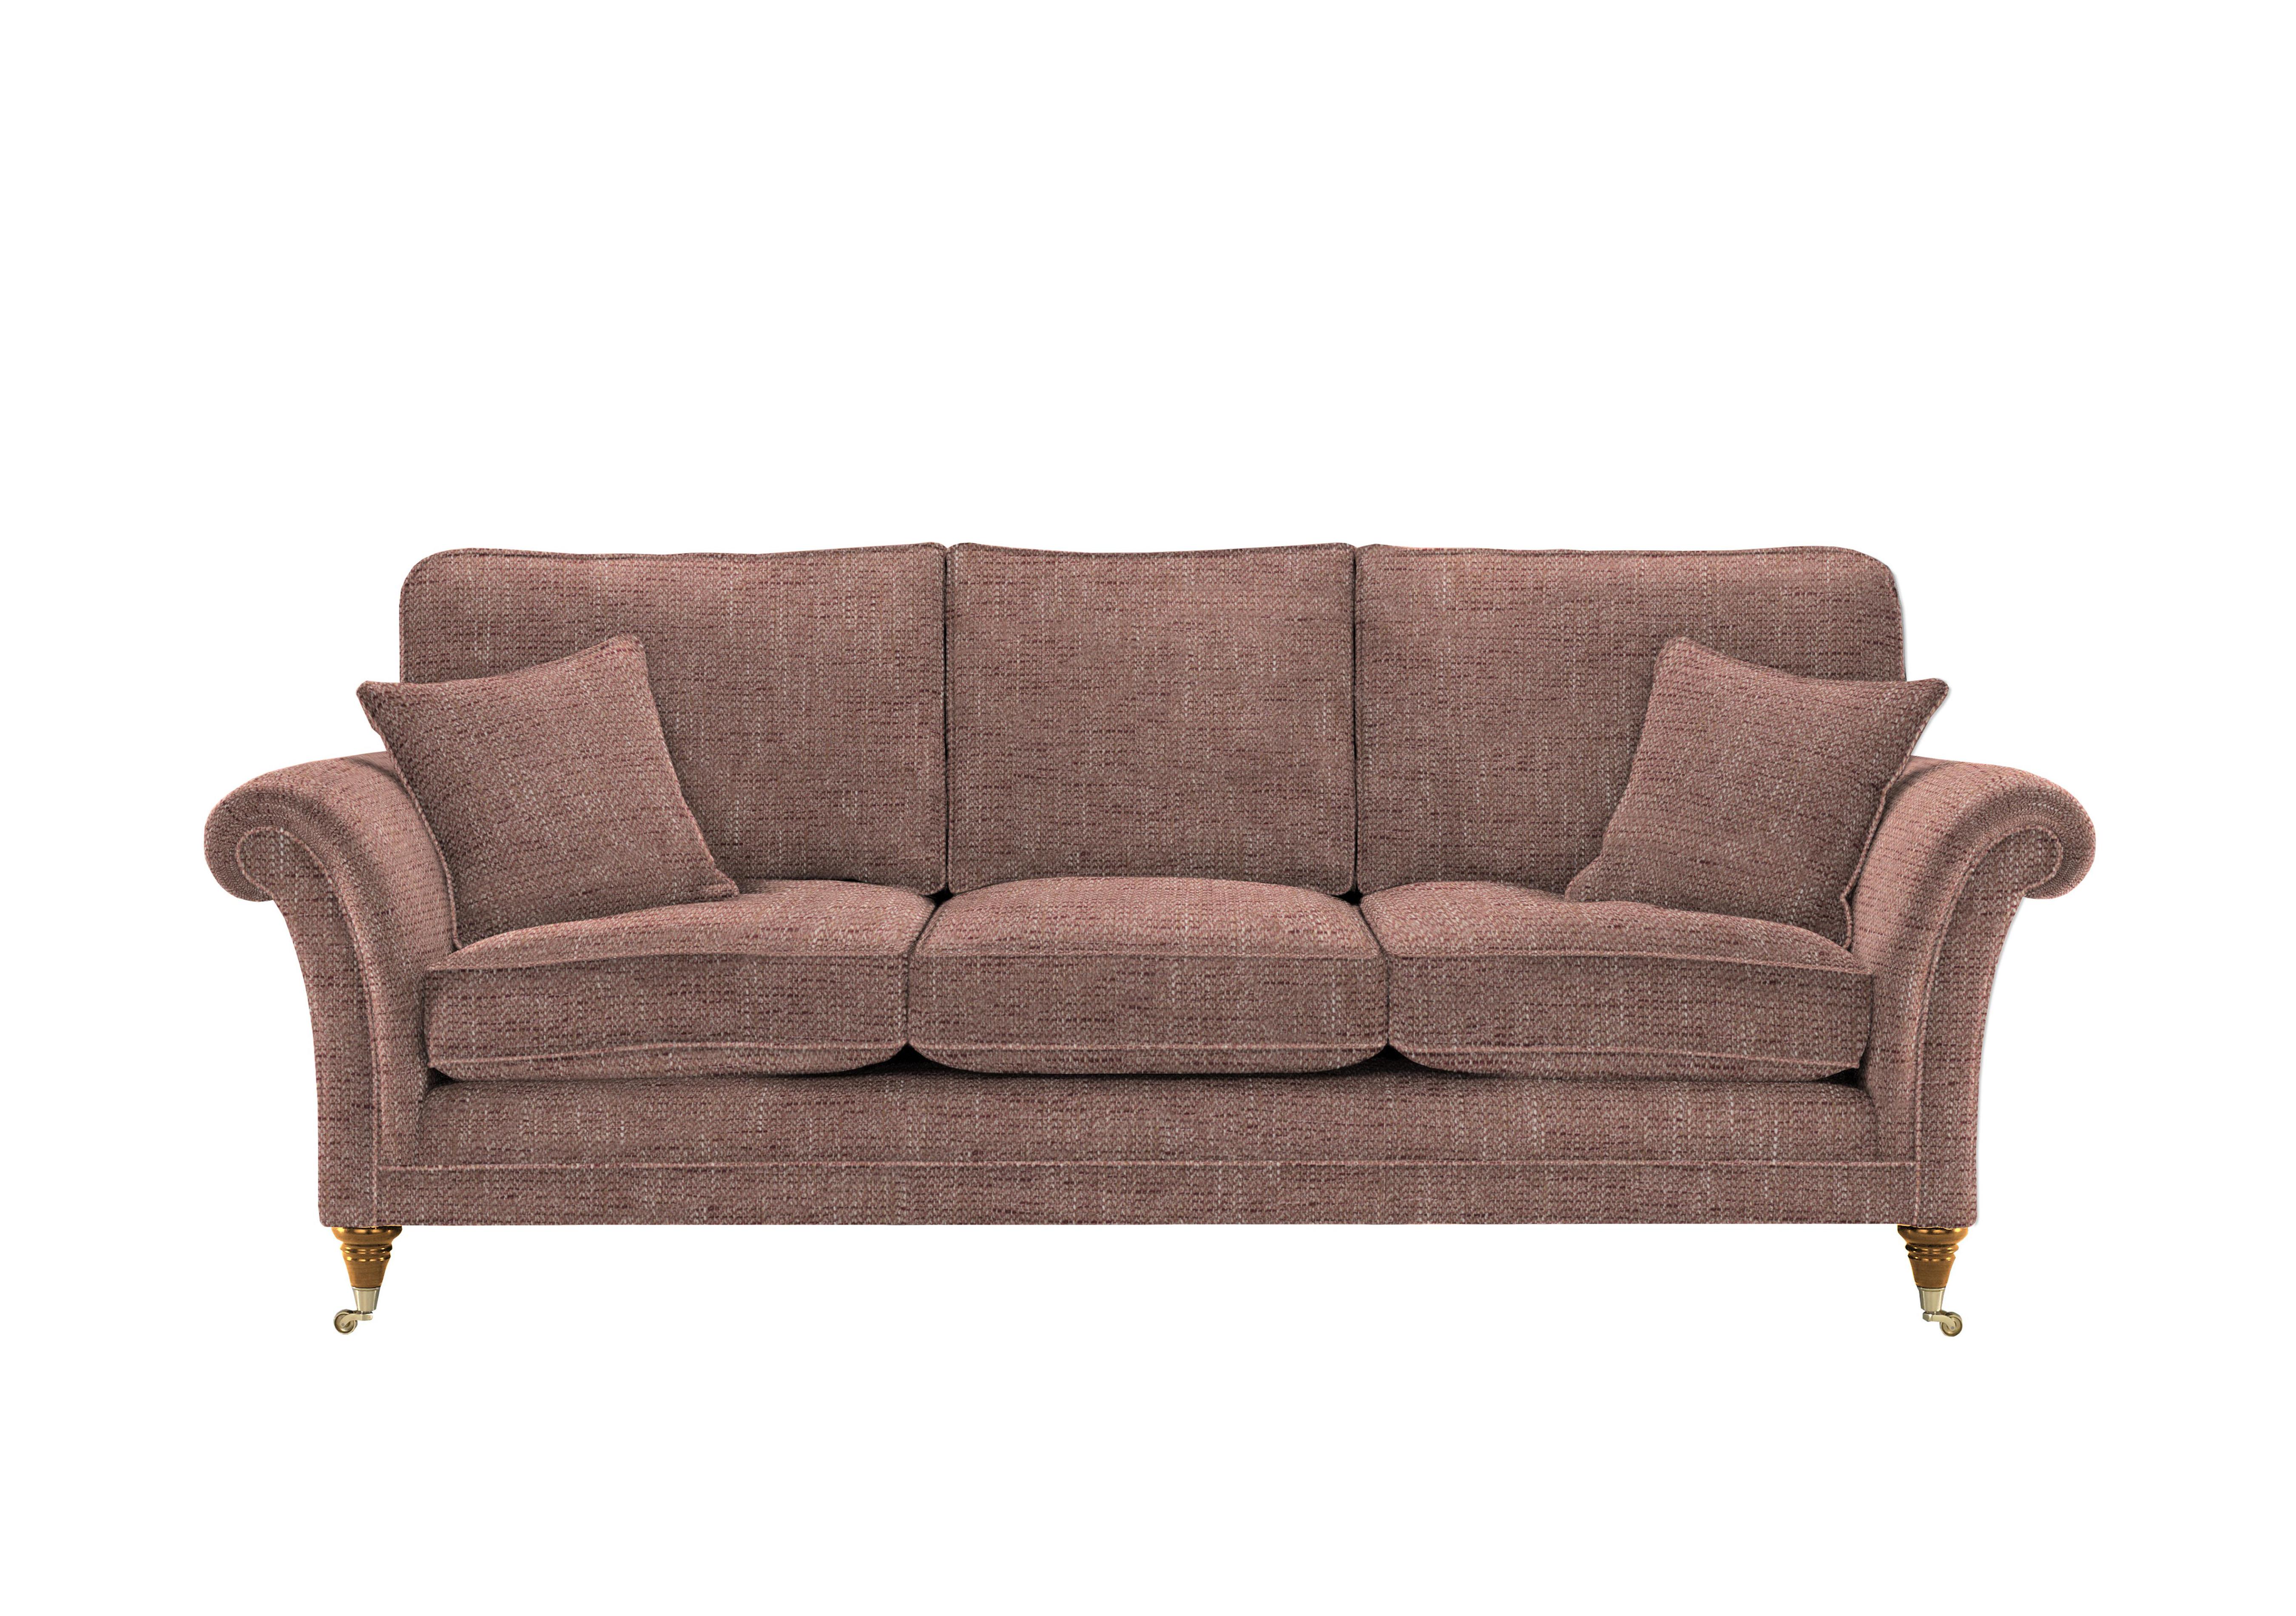 Burghley Grand 3 Seater Sofa in 001408-0003 Country Rose on Furniture Village